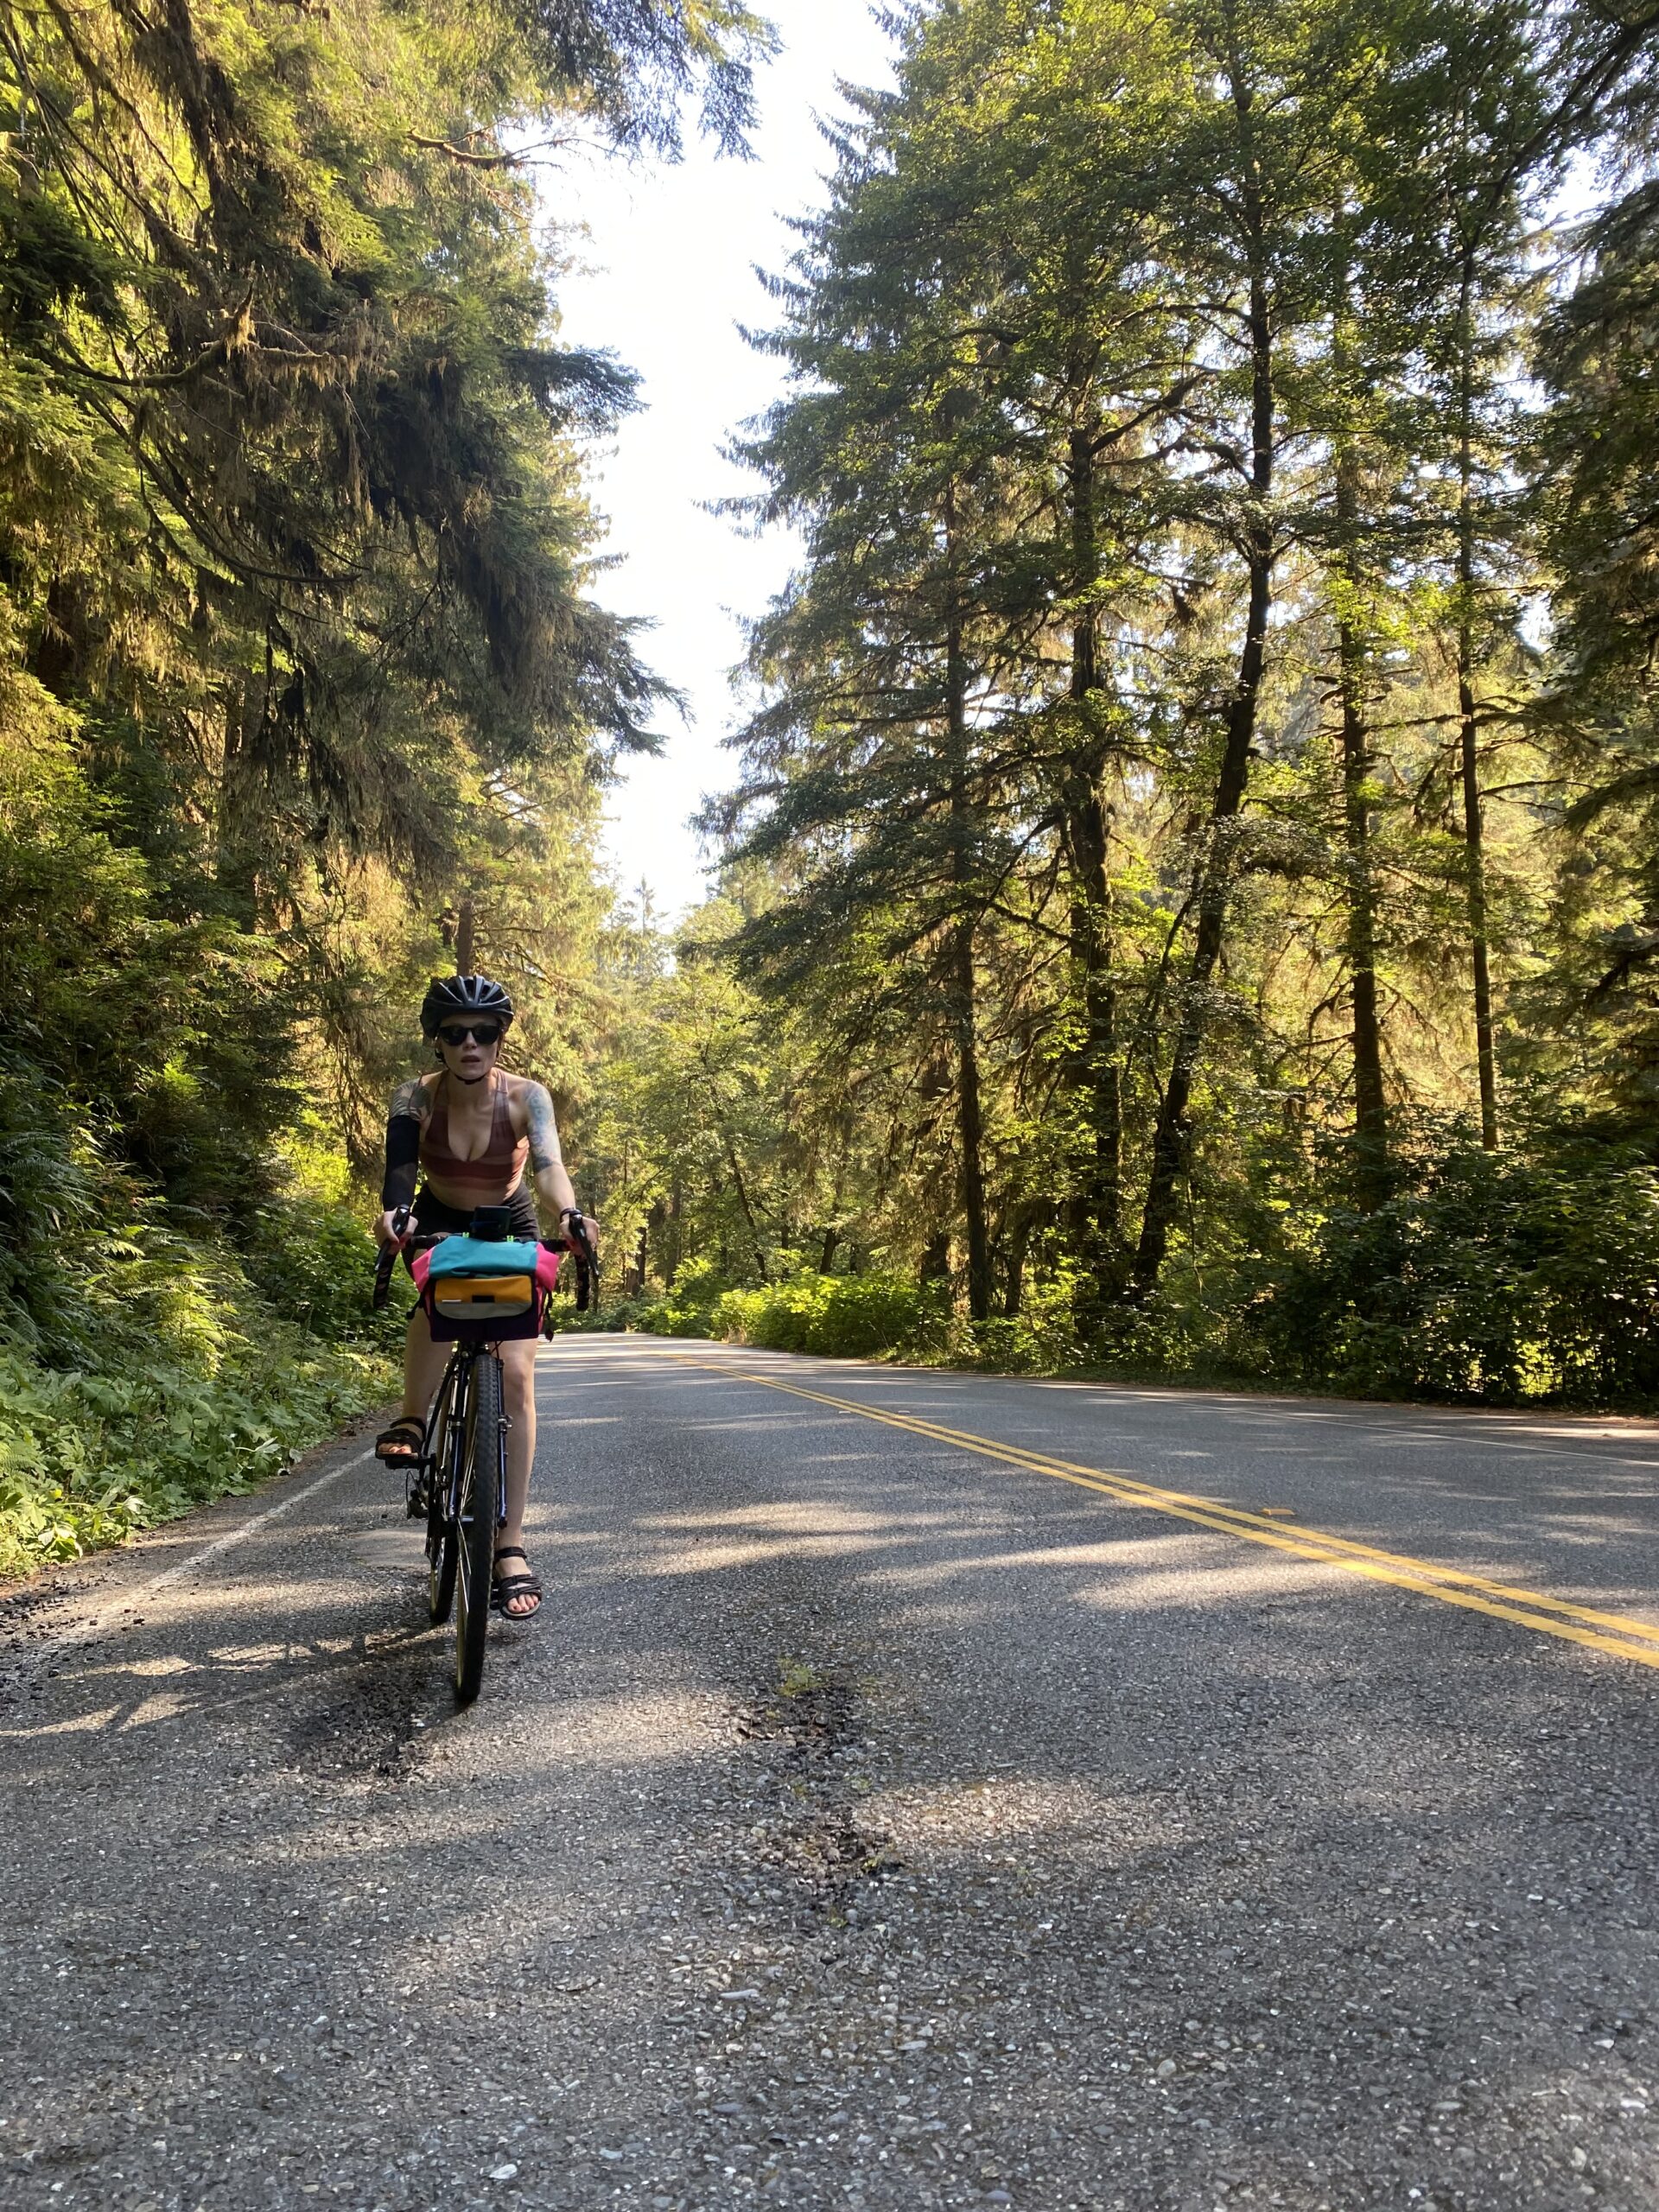 Girl biking on the road surrounded by redwood trees